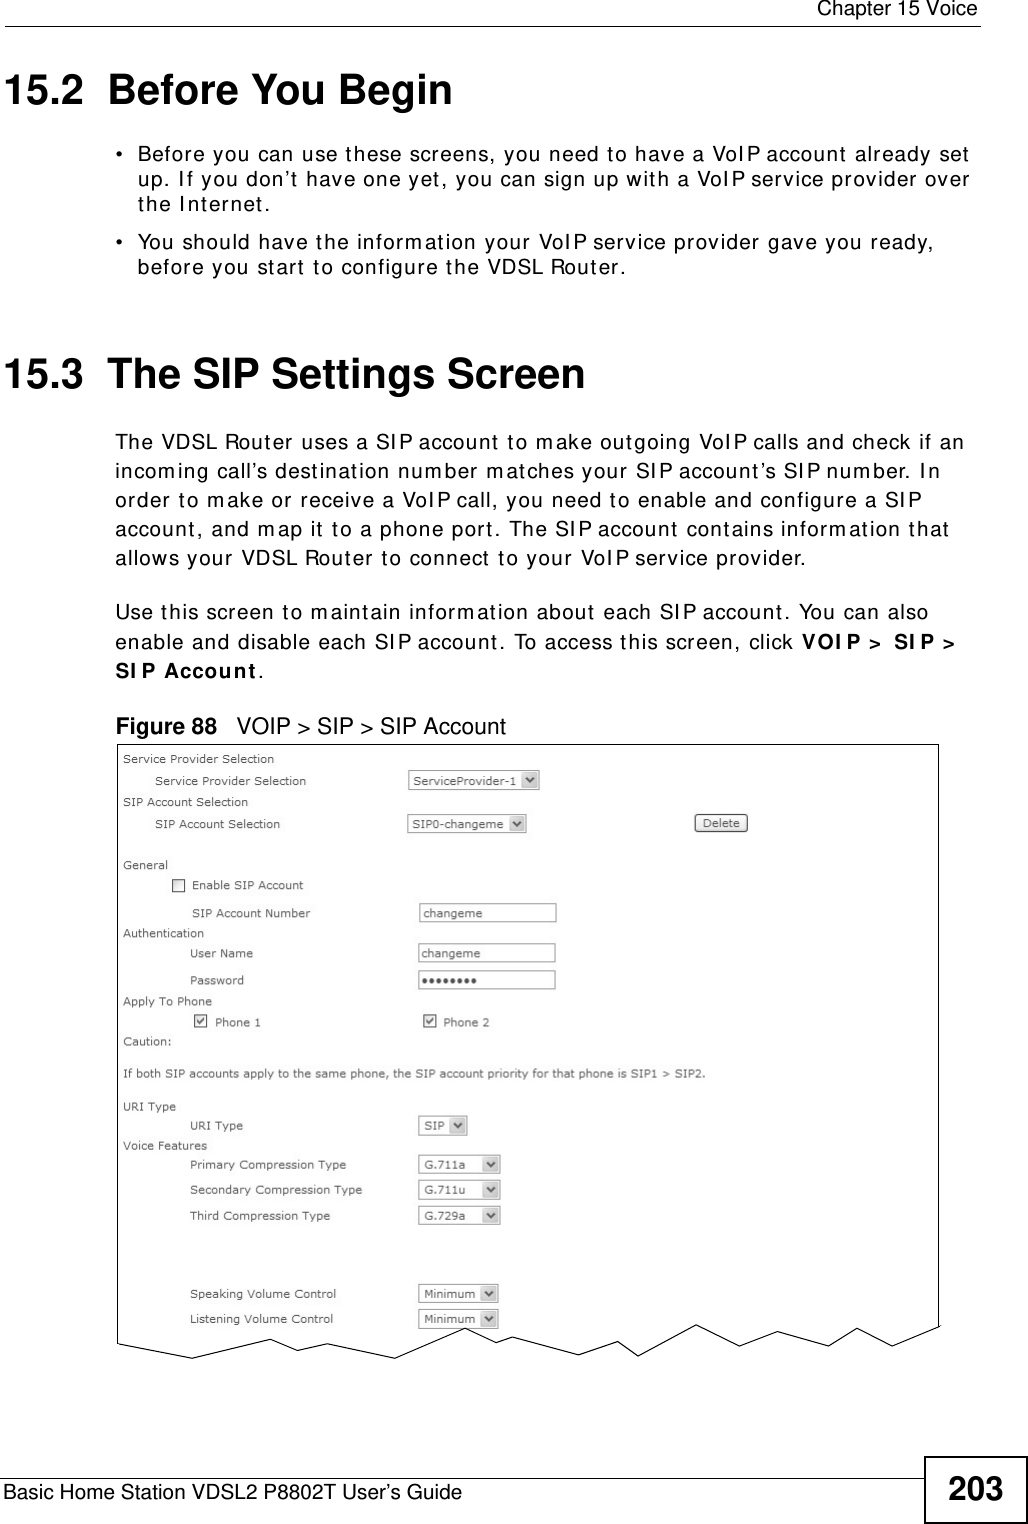  Chapter 15 VoiceBasic Home Station VDSL2 P8802T User’s Guide 20315.2  Before You Begin• Before you can use t hese screens, you need to have a VoI P account already set up. I f you don’t have one yet, you can sign up with a VoI P service pr ovider over the I nt ernet. • You should have the inform at ion your VoI P service provider gave you ready, before you start t o configure t he VDSL Rout er.15.3  The SIP Settings Screen The VDSL Rout er uses a SI P account to m ake out going VoI P calls and check if an incom ing call’s dest inat ion num ber m at ches your SI P account ’s SI P num ber. I n order to m ake or receive a VoI P call, you need t o enable and configure a SI P account , and m ap it to a phone port. The SI P account  contains inform at ion that  allows your VDSL Router to connect to your VoI P service provider. Use t his screen to m aint ain inform ation about  each SI P account . You can also enable and disable each SI P account. To access t his screen, click VOI P &gt;  SI P &gt;  SI P Account.Figure 88   VOIP &gt; SIP &gt; SIP Account